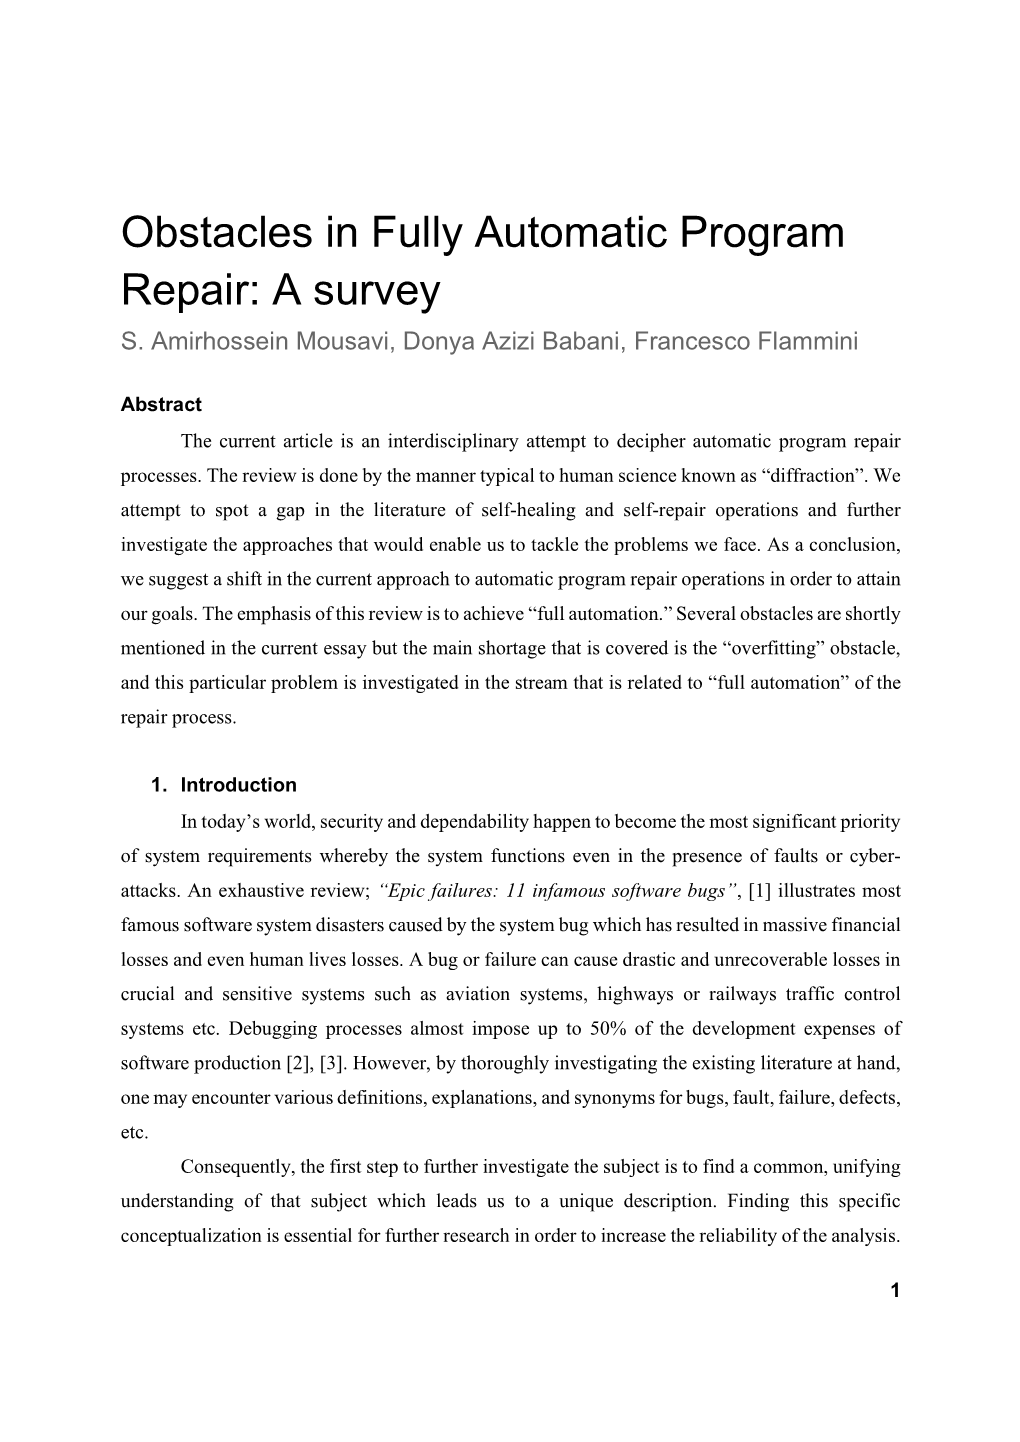 Obstacles in Fully Automatic Program Repair: a Survey S